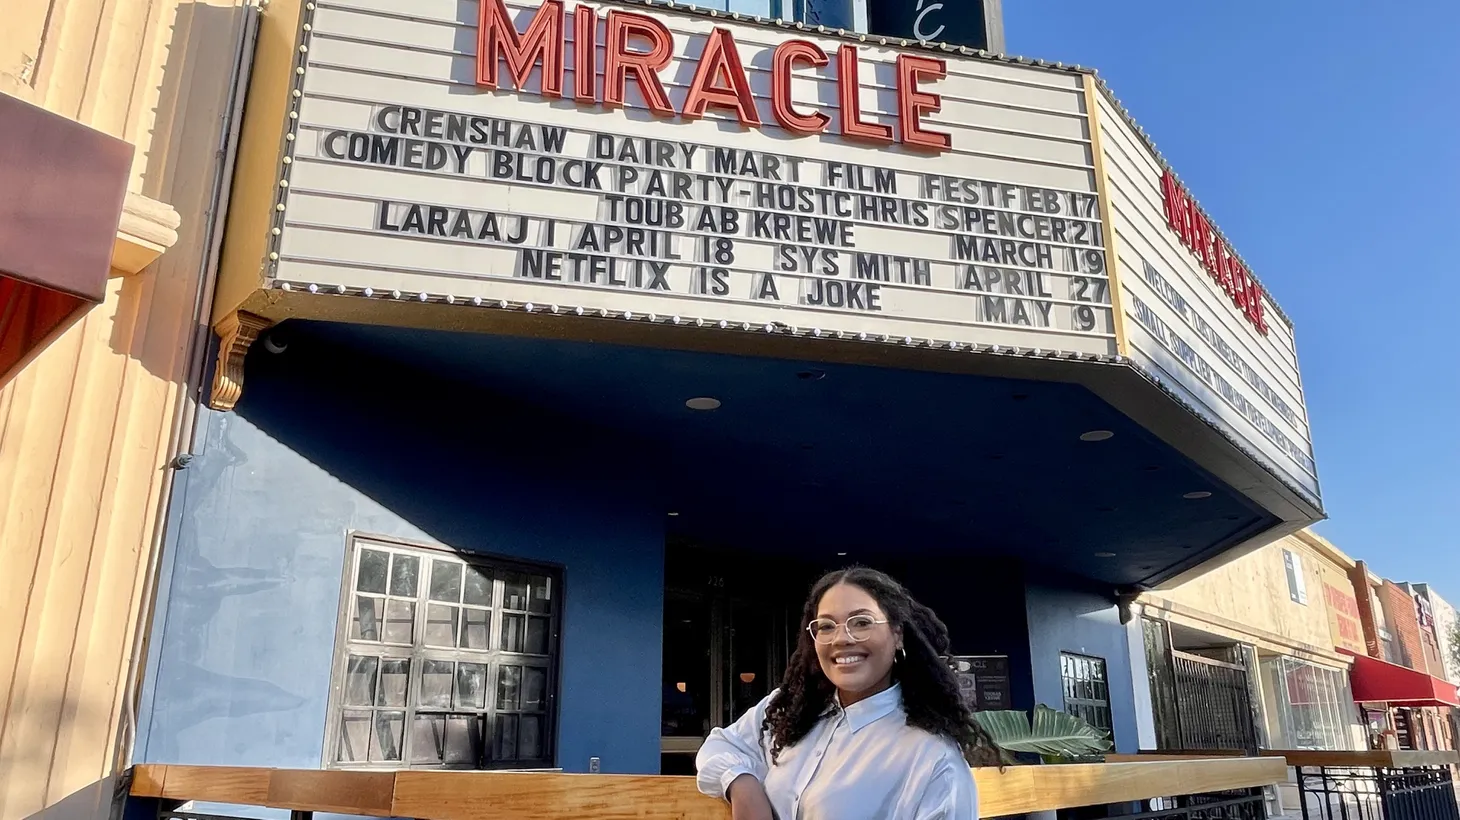 Executive Director Ashley Blakeney picked the Miracle Theater for The Crenshaw Dairy Mart’s first film festival to keep the event close to filmmakers located in Inglewood and South LA.